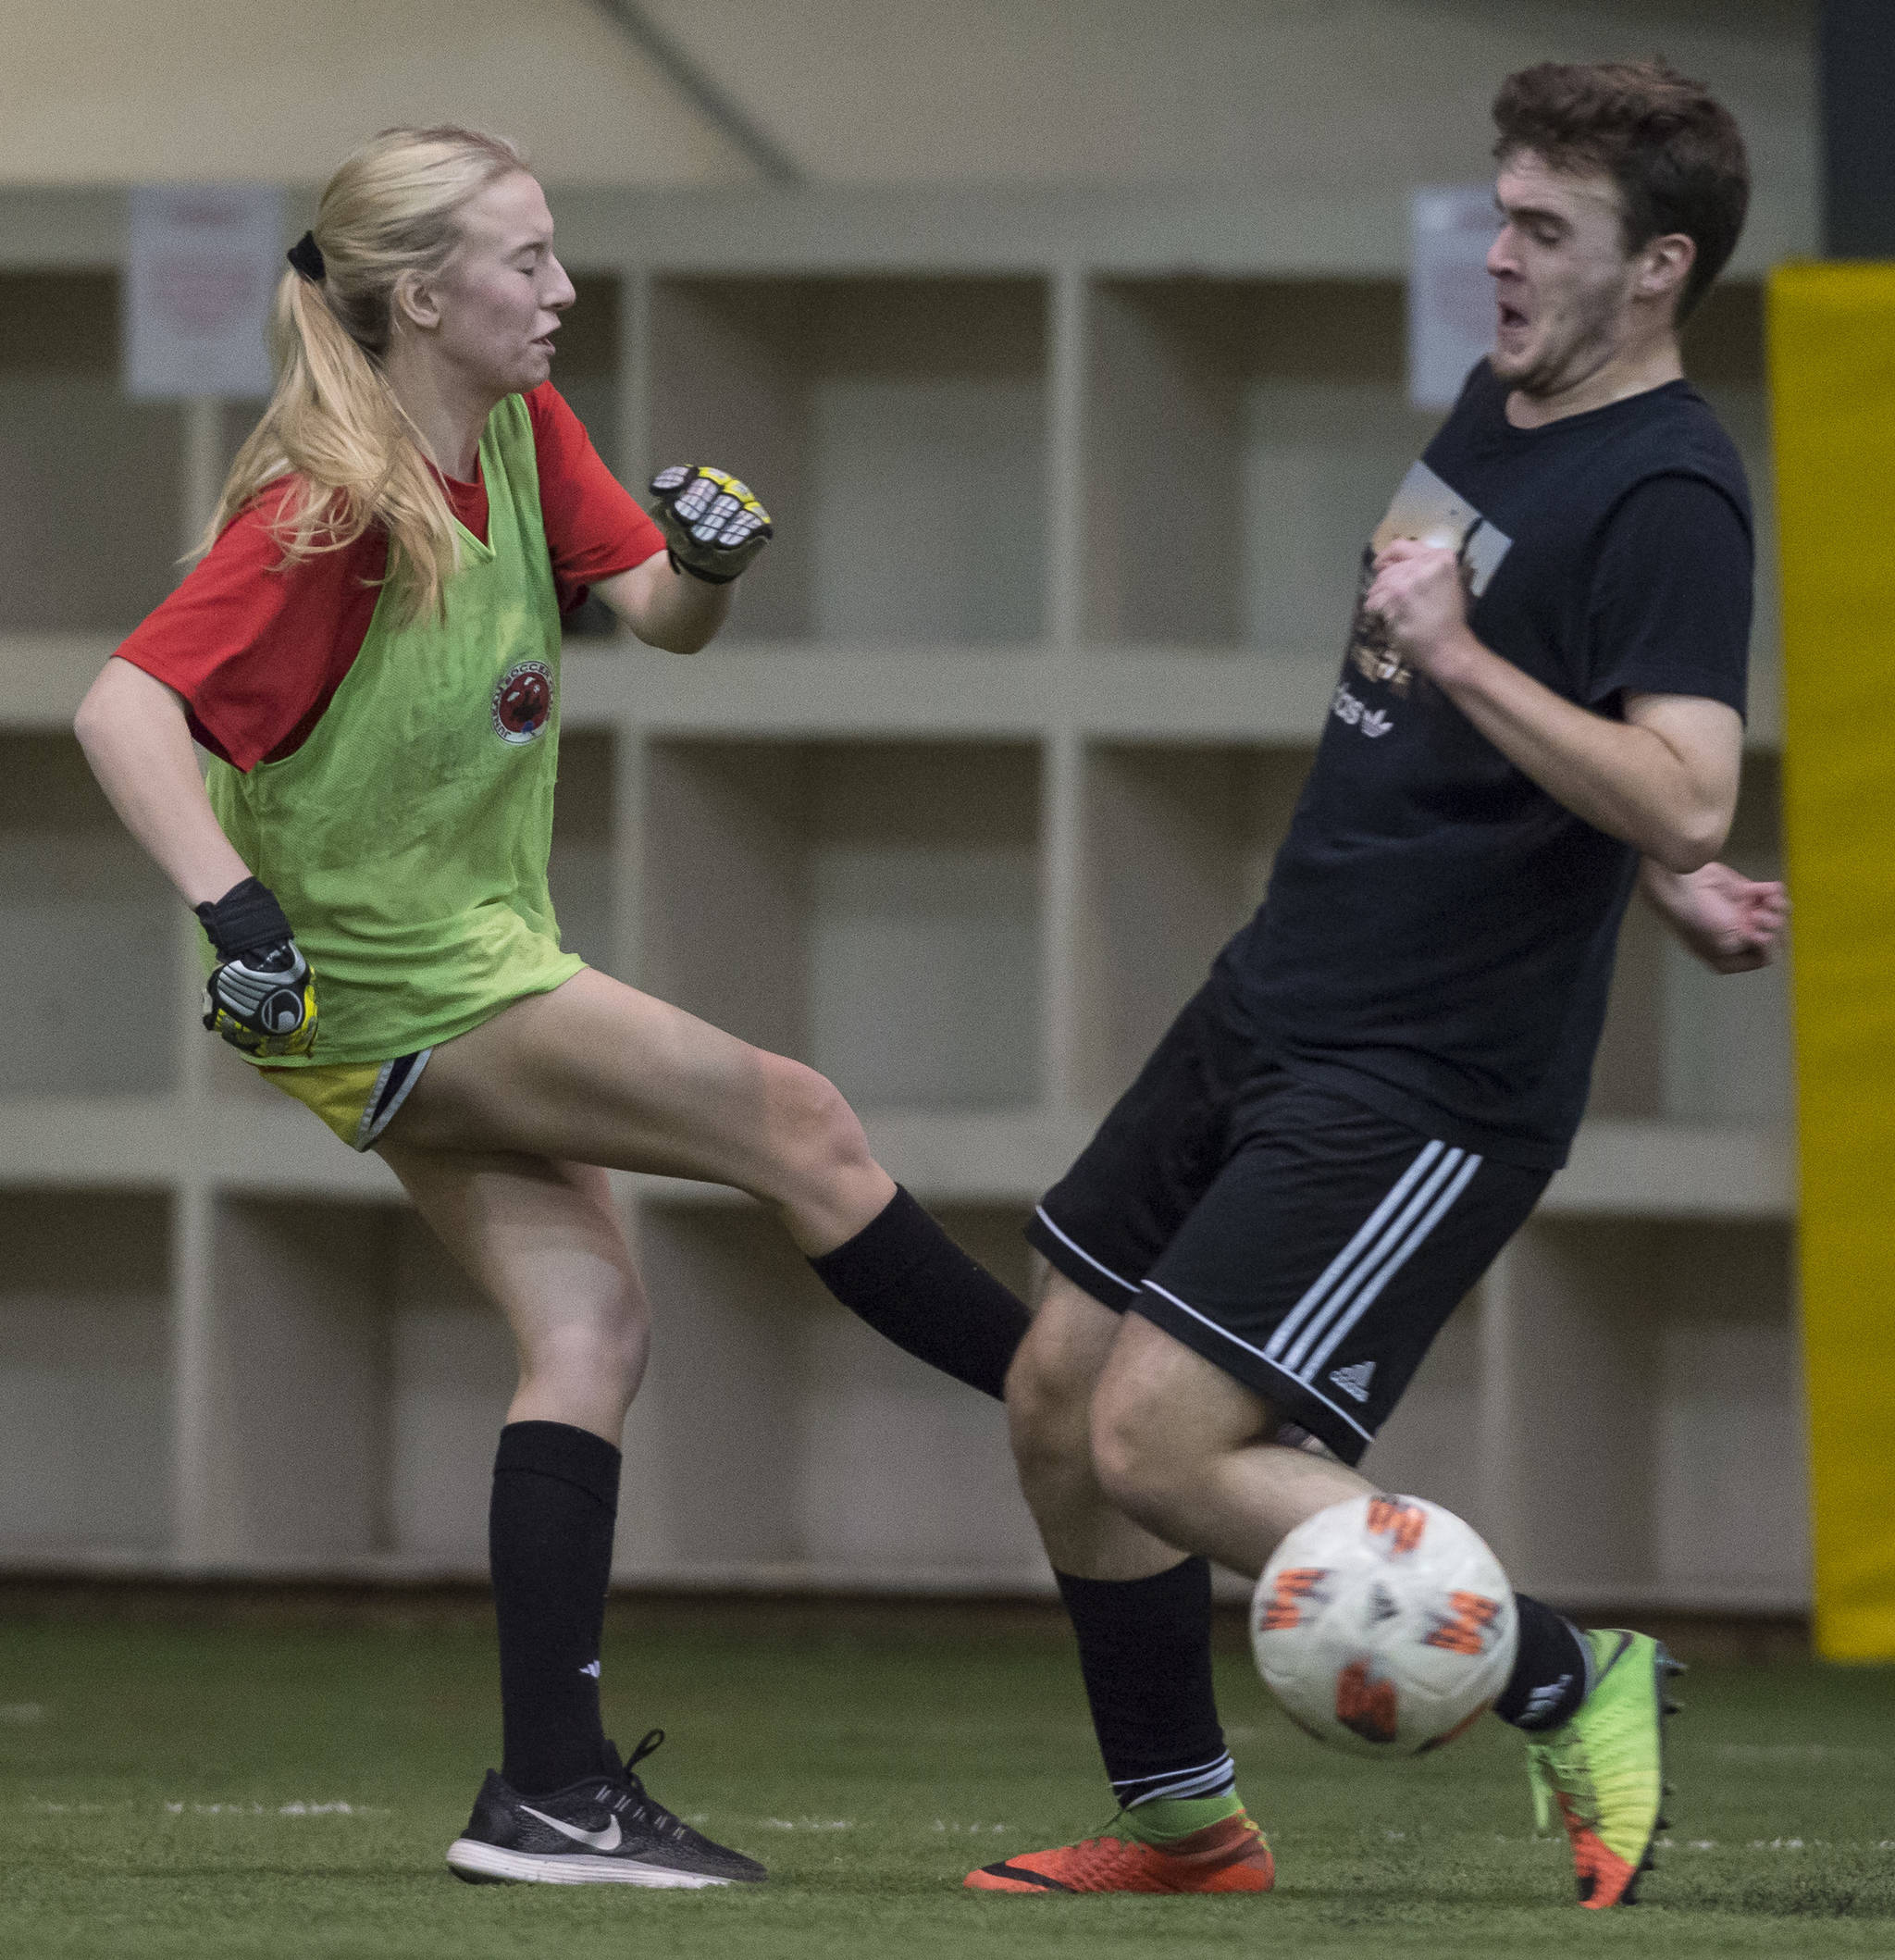 Grinch Gang, red, competes against Black Ice, black, in the finals of the senior division at the annual Holiday Cup Soccer Tournament at the Wells Fargo Dimond Park Field House on Monday, Dec. 31, 2018. The Grinch Gang won 8-2. (Michael Penn | Juneau Empire)